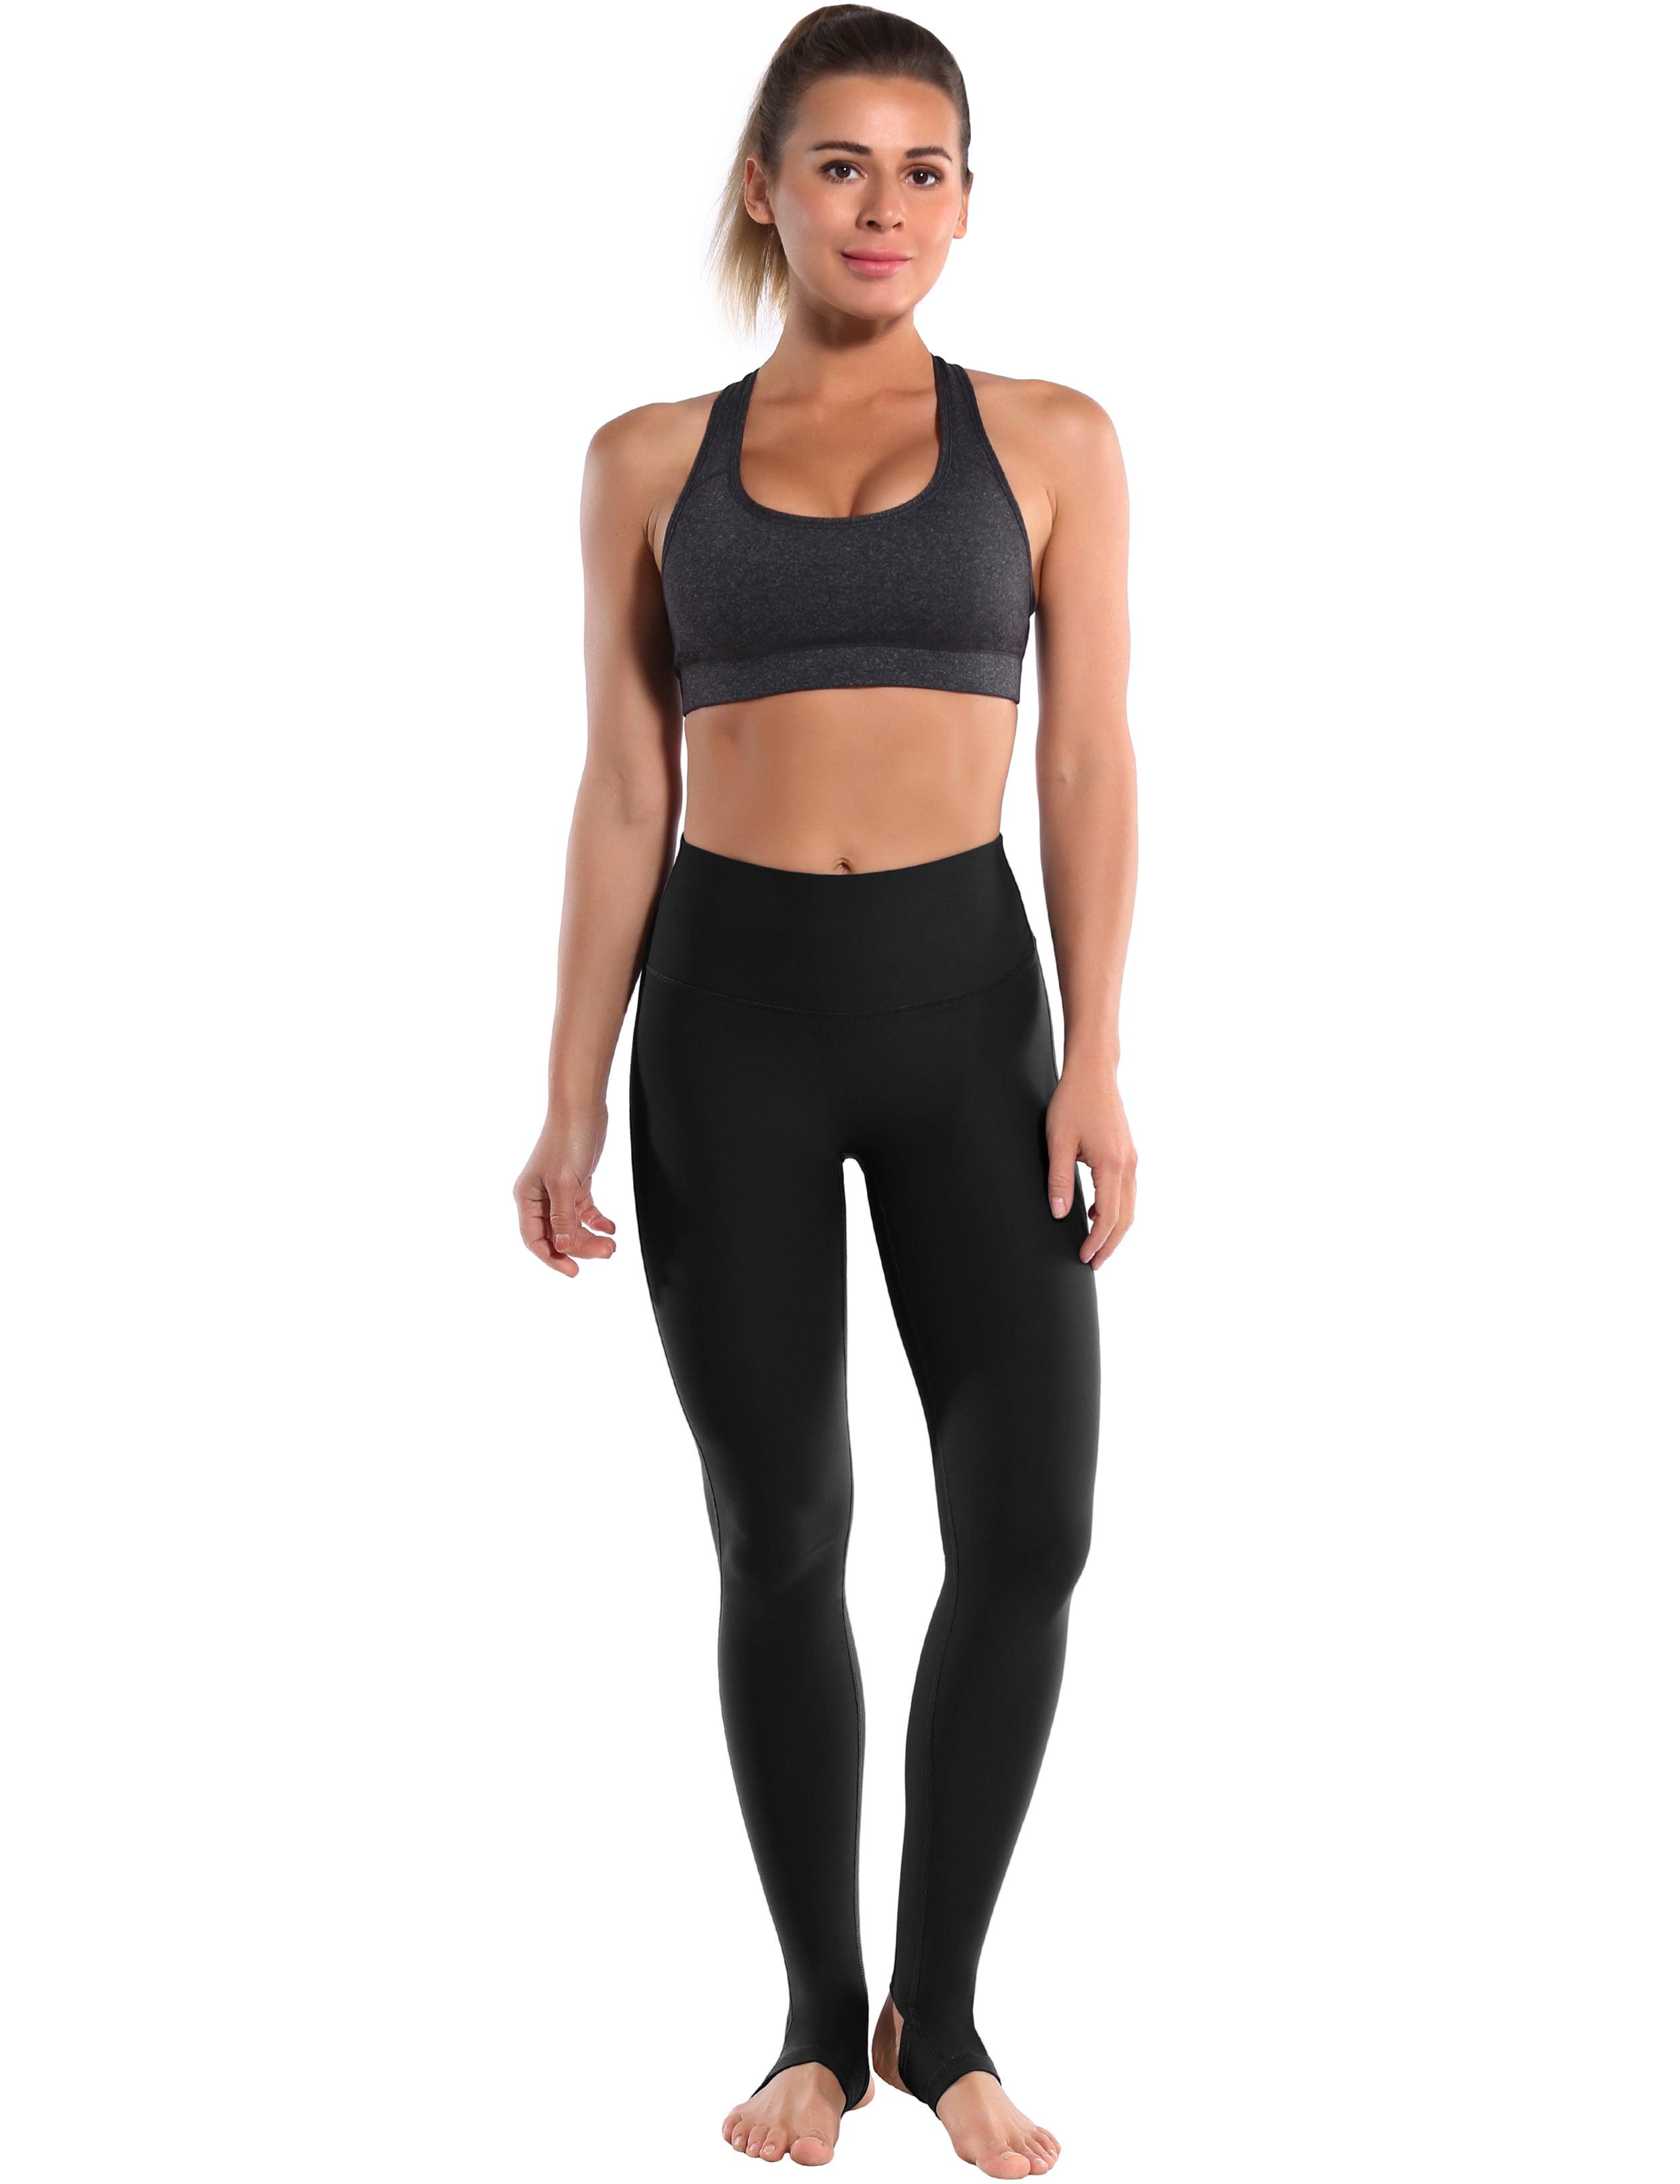 Over the Heel Pilates Pants black Over the Heel Design 87%Nylon/13%Spandex Fabric doesn't attract lint easily 4-way stretch No see-through Moisture-wicking Tummy control